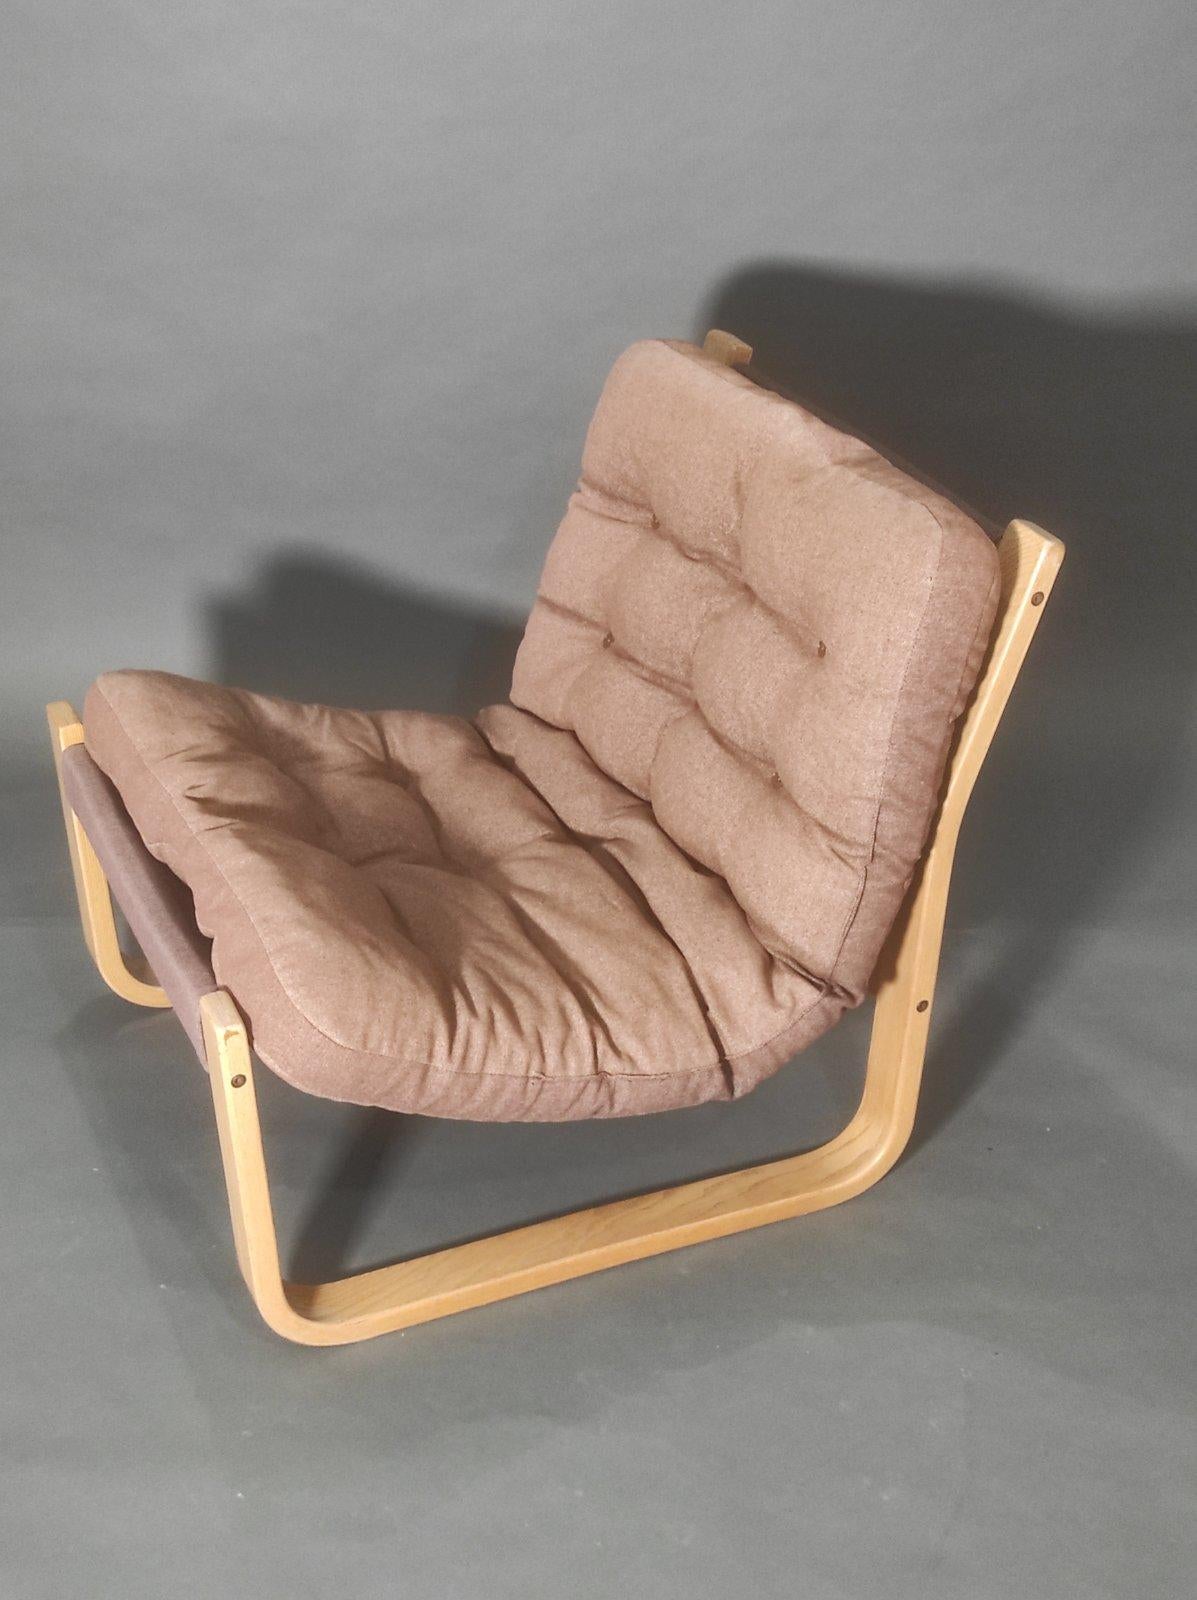 Chaise Swed Form Longue 1970